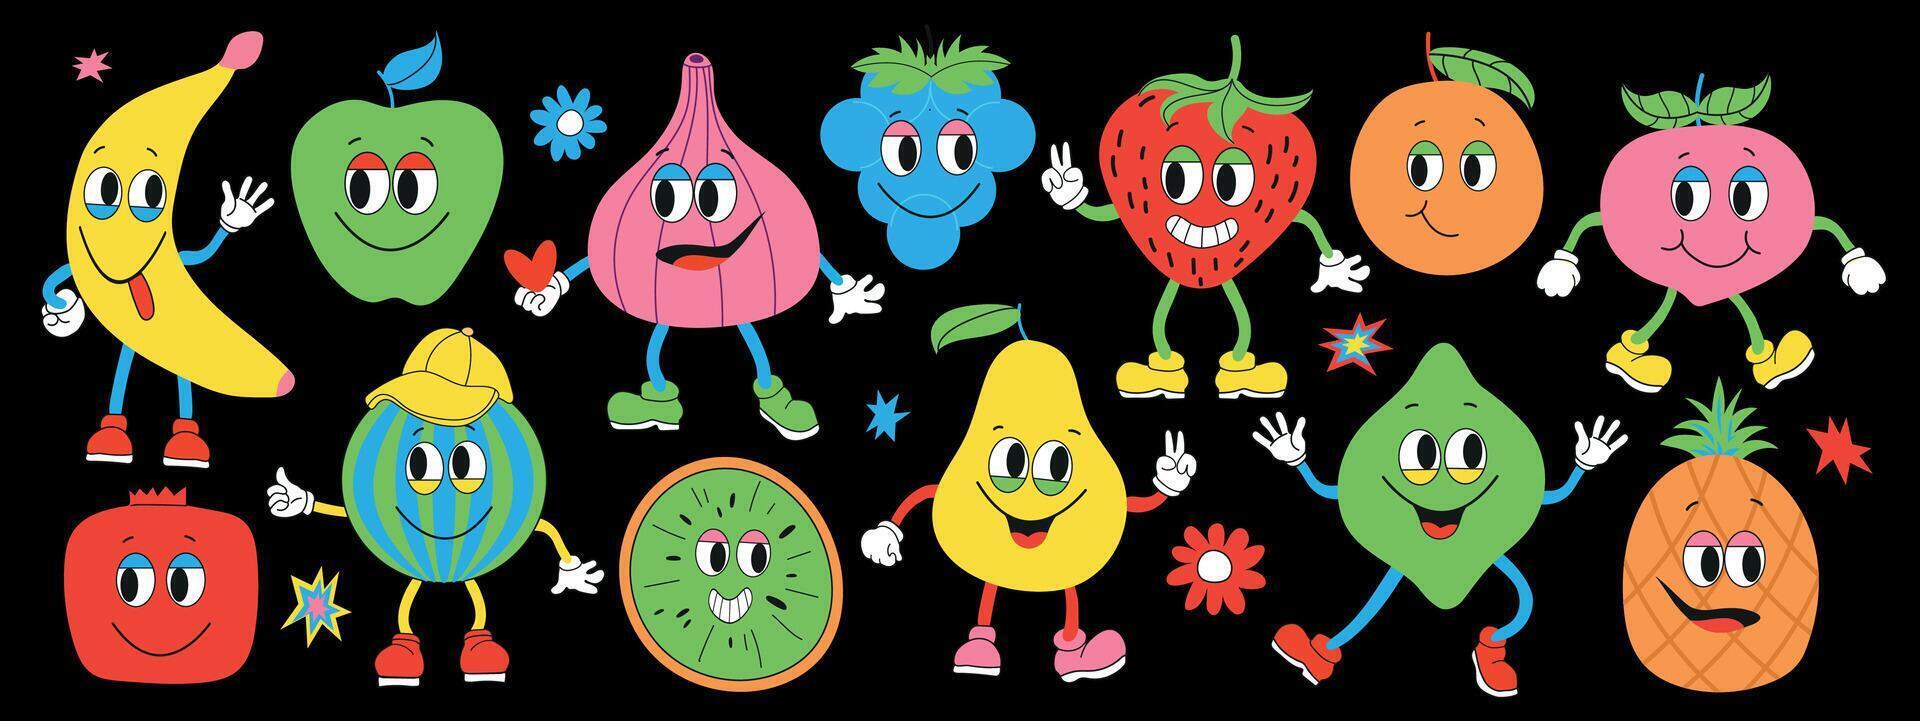 Groovy fruits set. Fruit retro cartoon characters on a dark background.Hand draw Funny Retro vintage trendy style fruits cartoon character.Groovy summer vector illustration. Fruits juicy sticker pack.